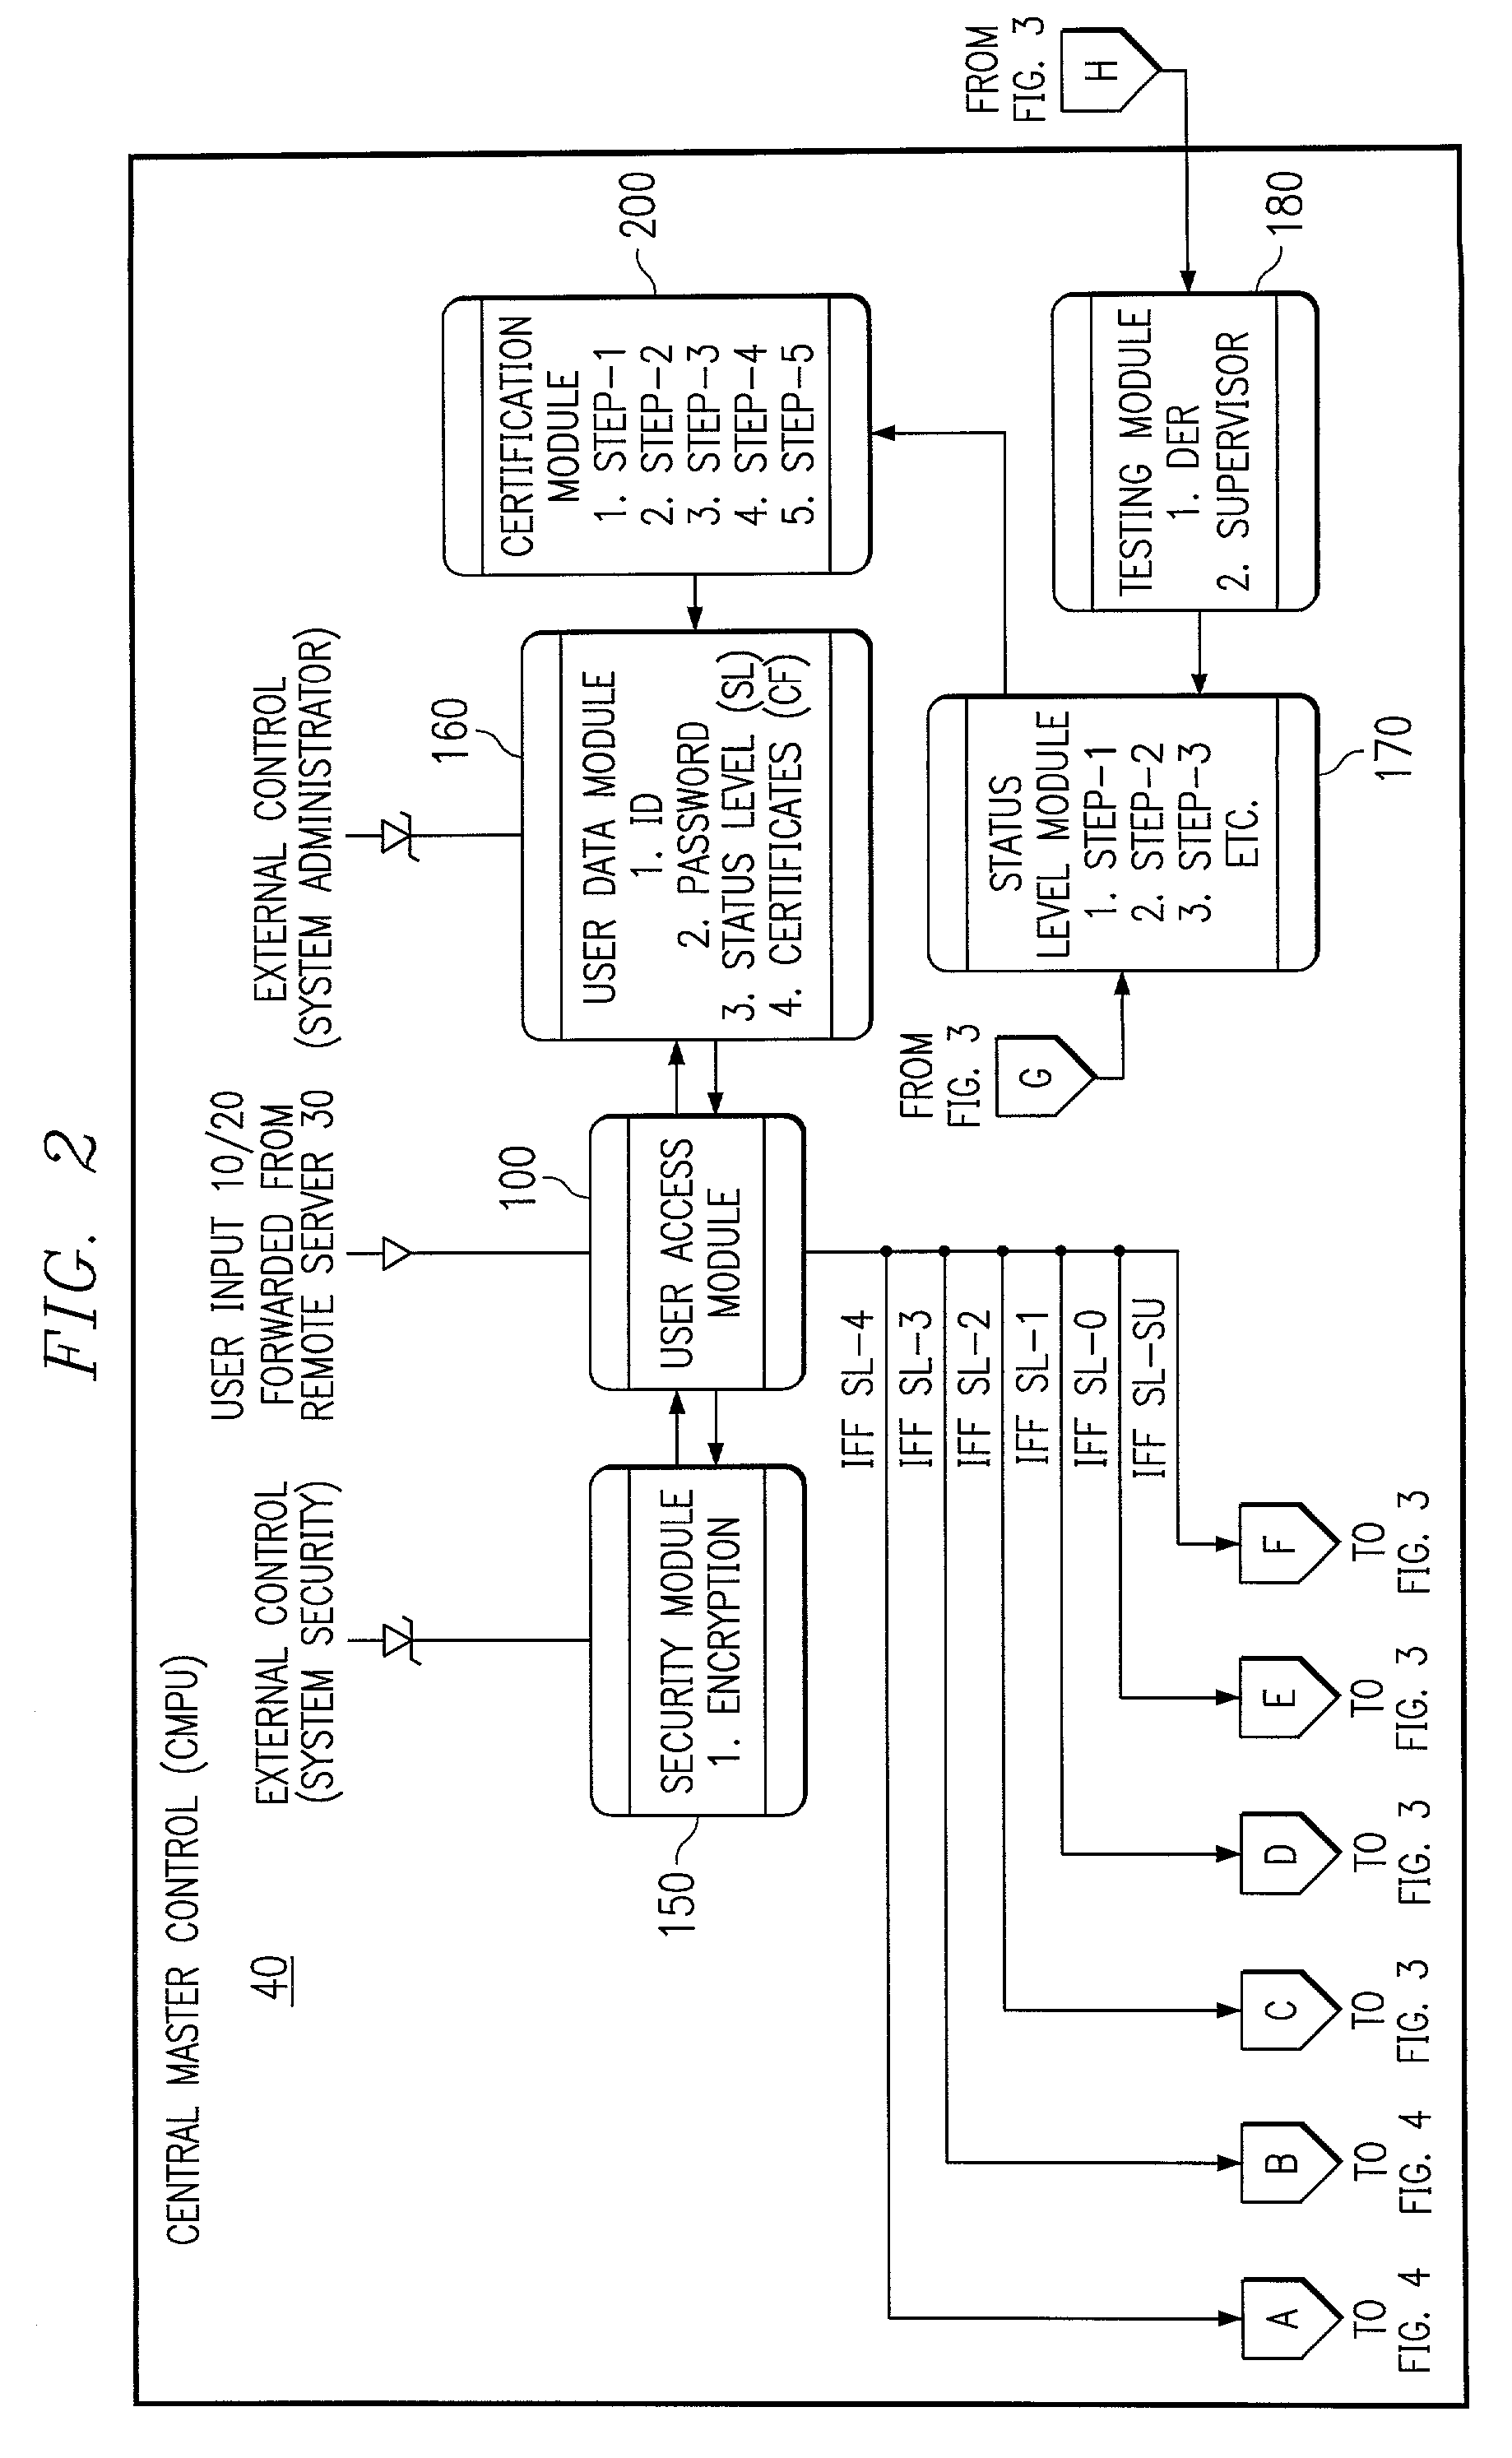 System and method for implementing an employee-rights-sensitive drug free workplace policy